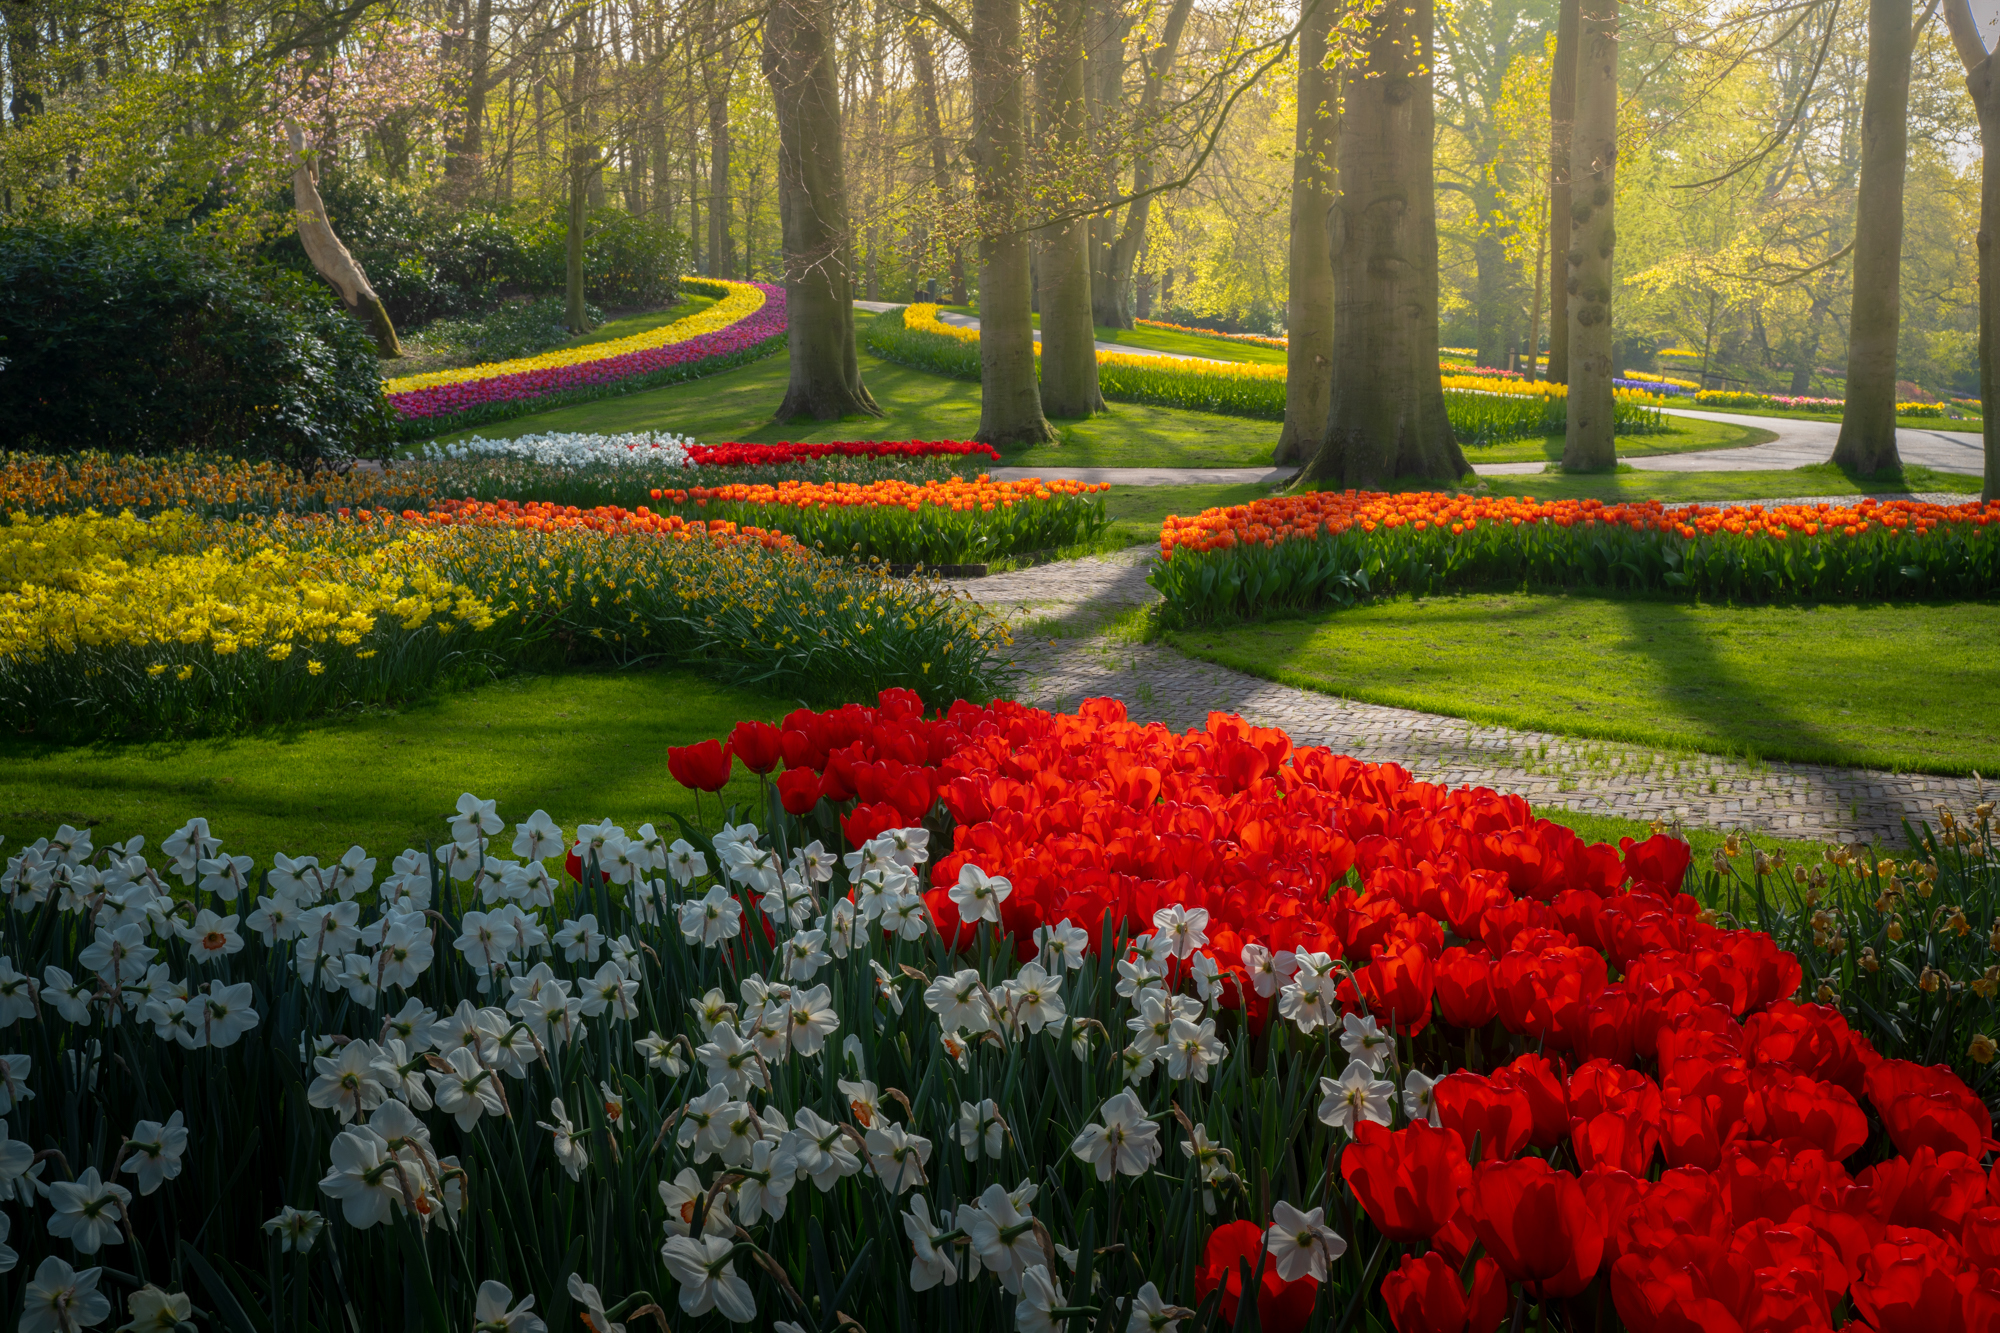 This photographer has captured the most beautiful tulip garden in the world  – without any visitors